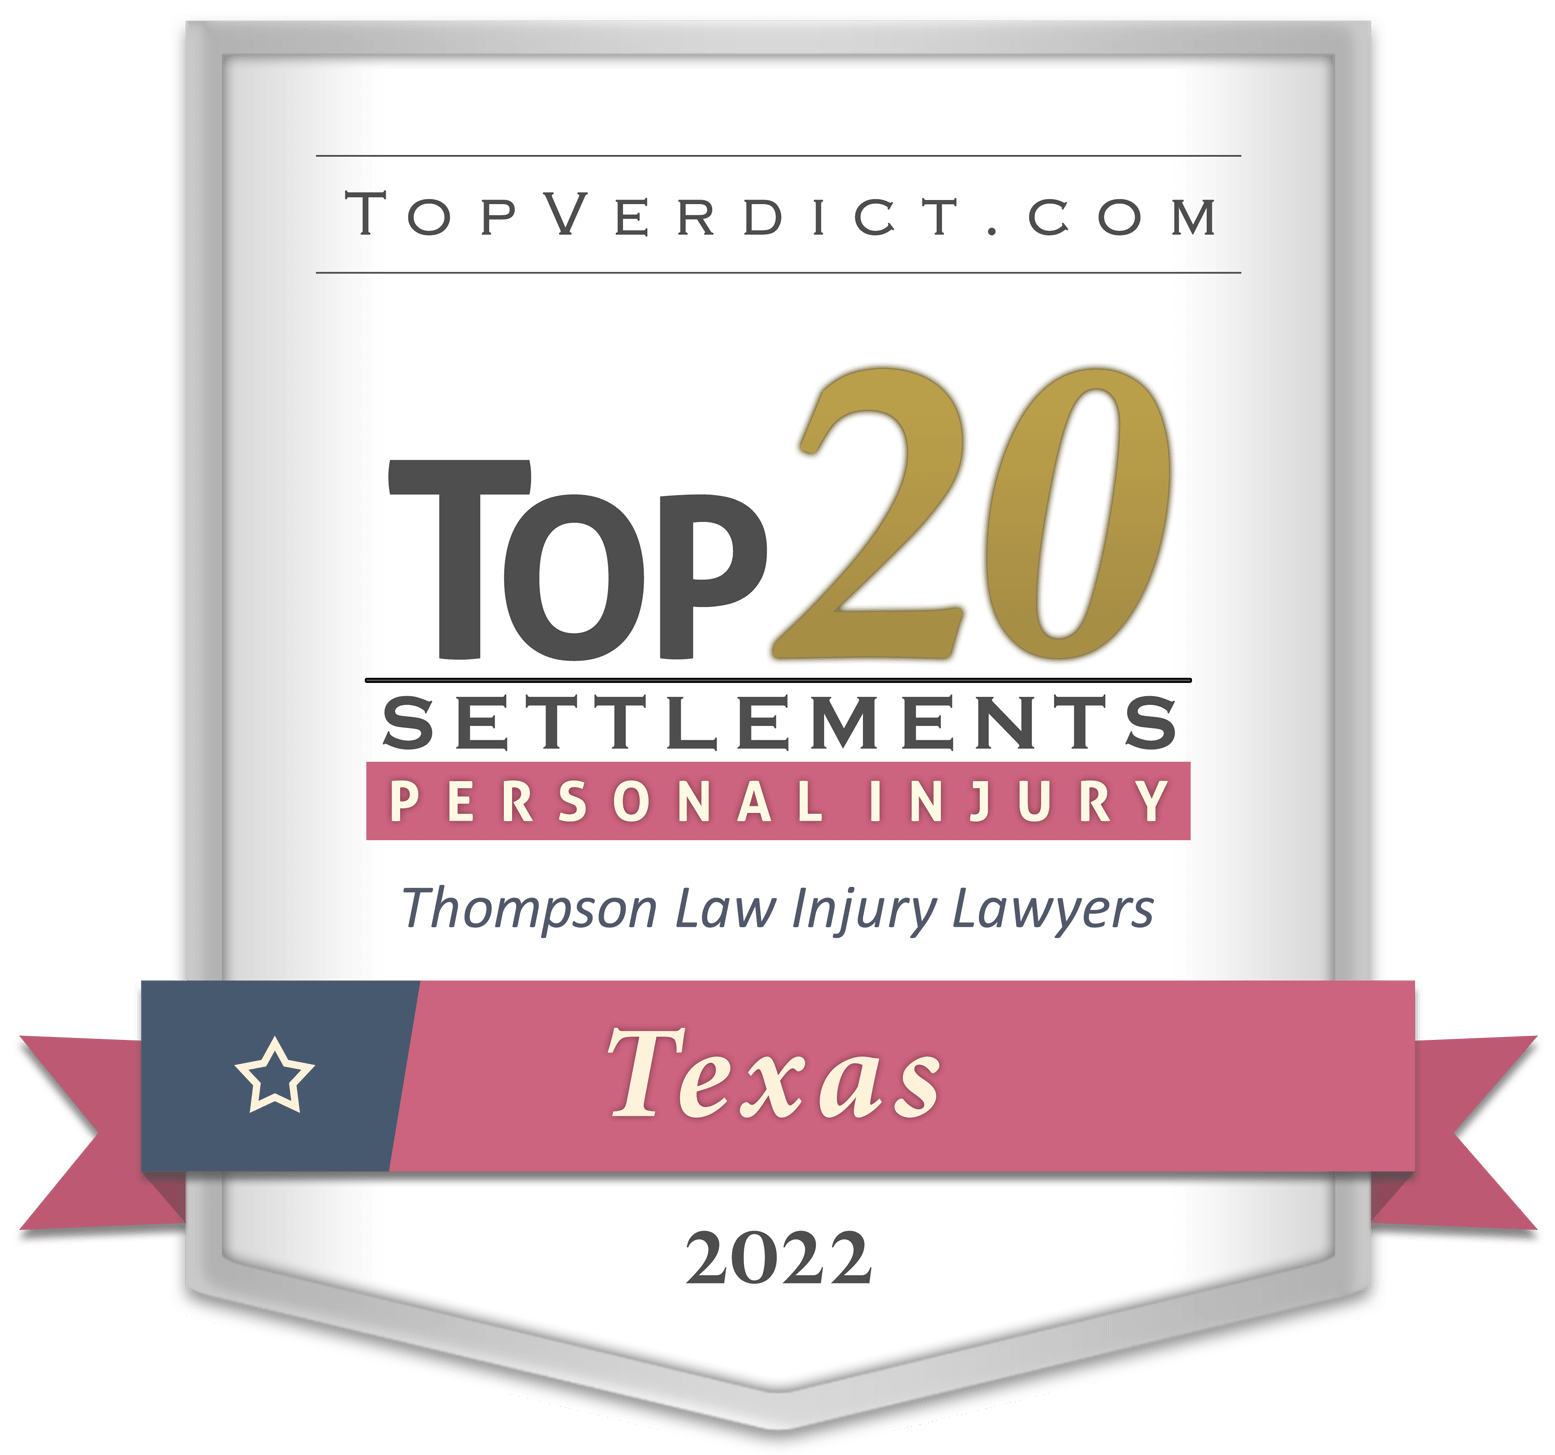 TopVerdict Top 20 personal injury settlements in Texas 2022 badge - Pasadena Personal Injury Law Firm